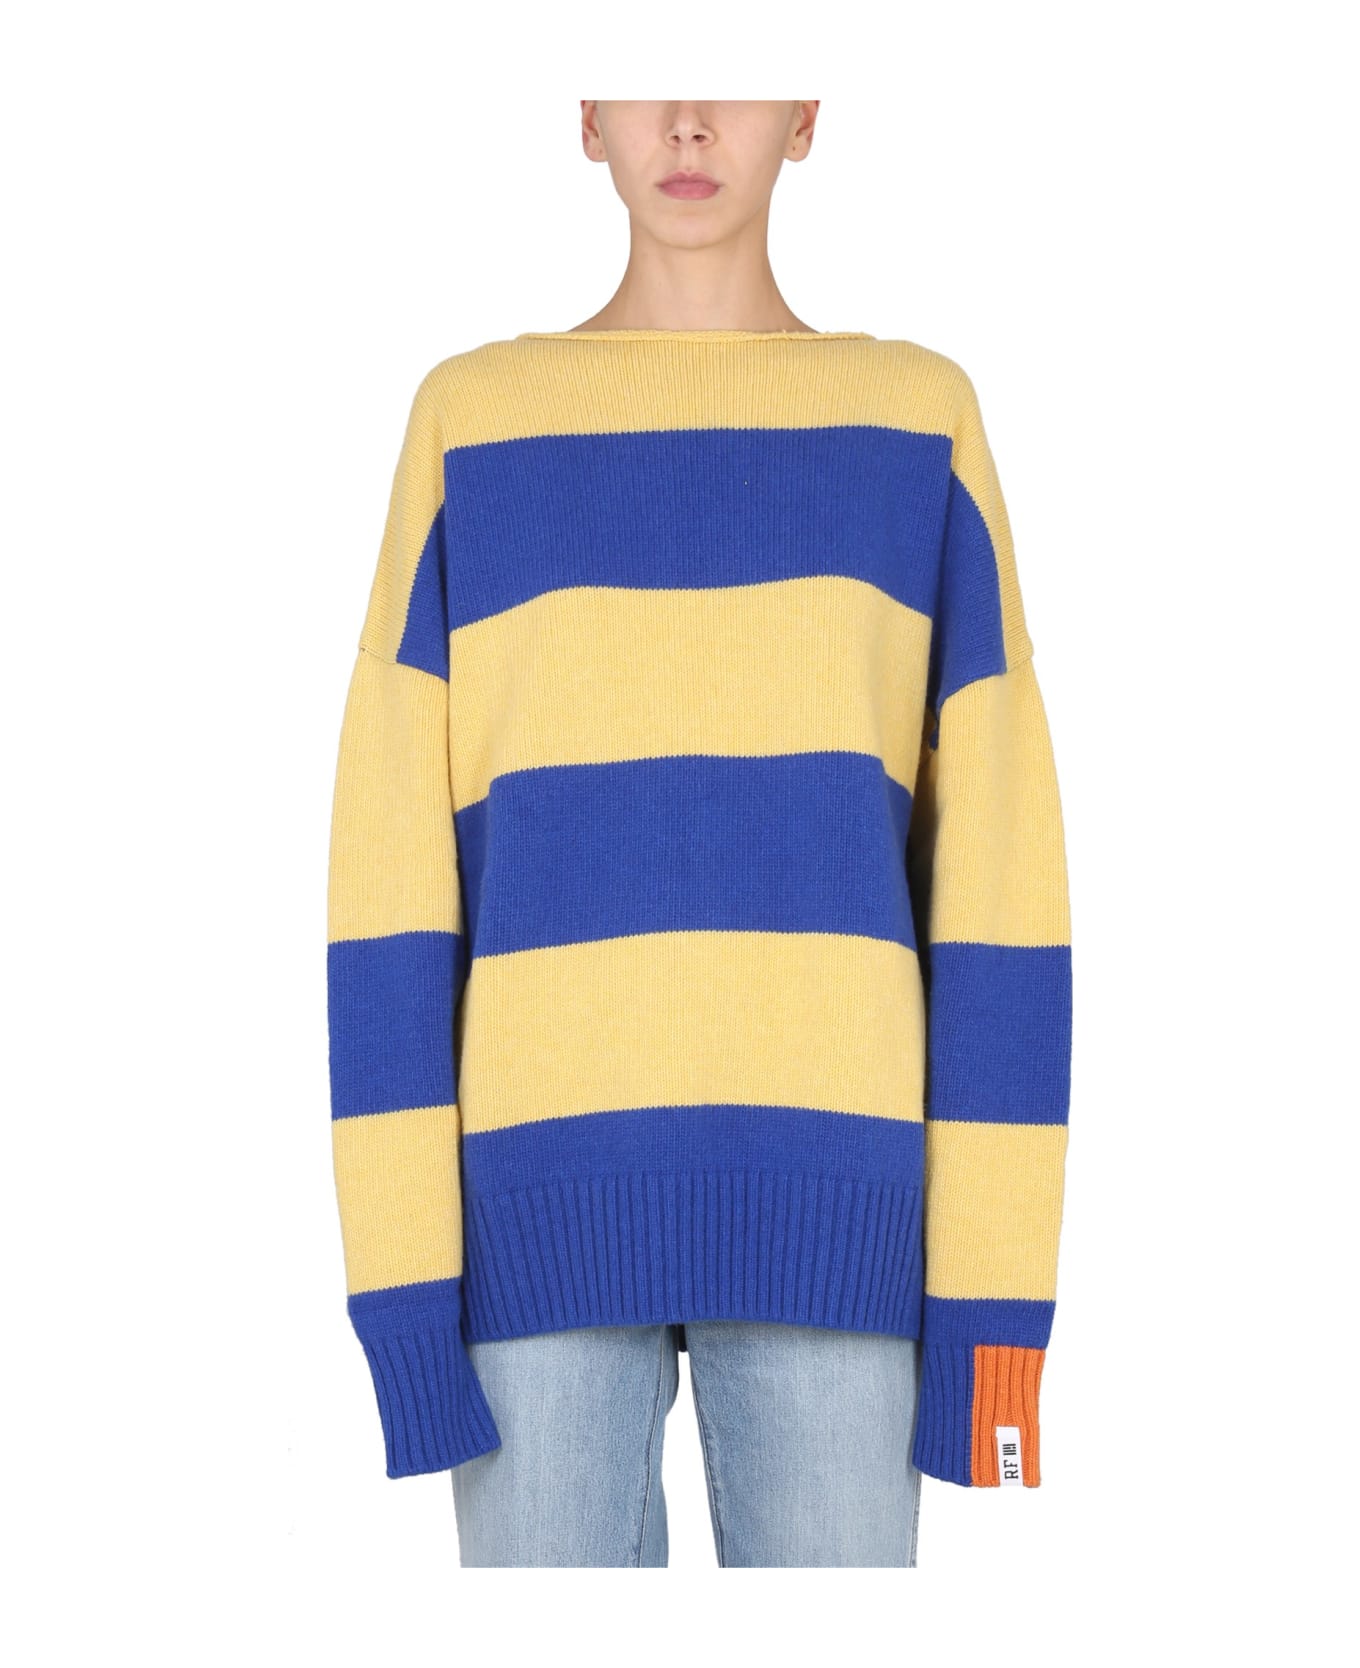 Right For Striped Shirt - GIALLO